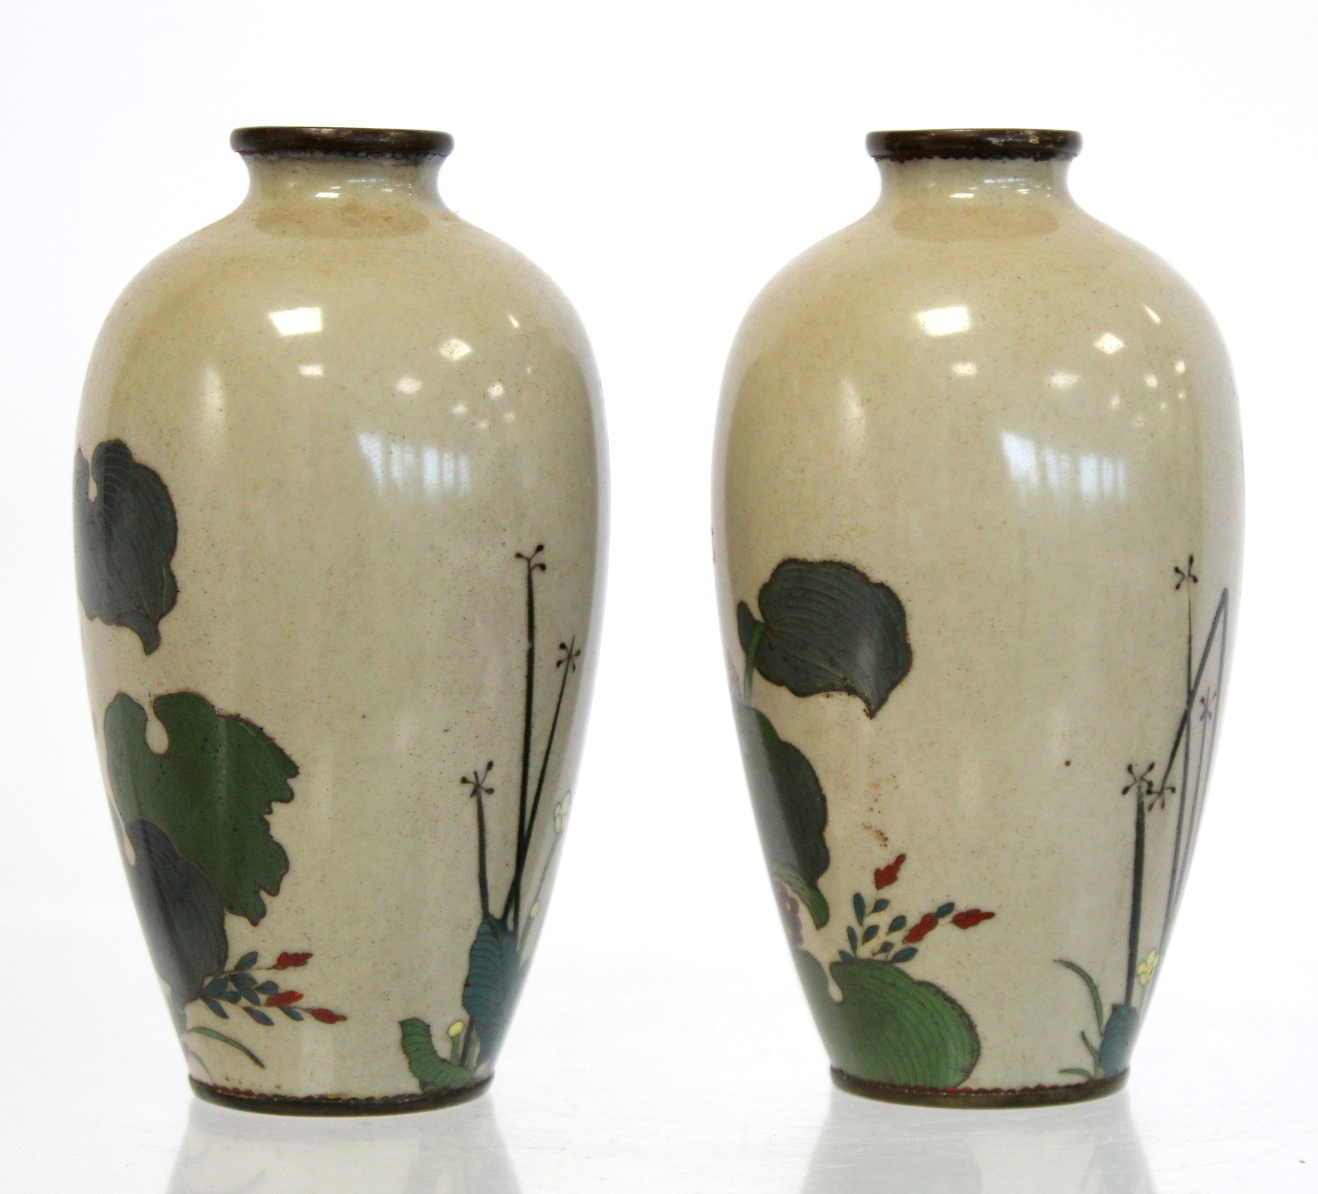 Pair of small Japanese Meiji period cloisonné vases with polychrome enamel decoration highlighted - Image 5 of 20